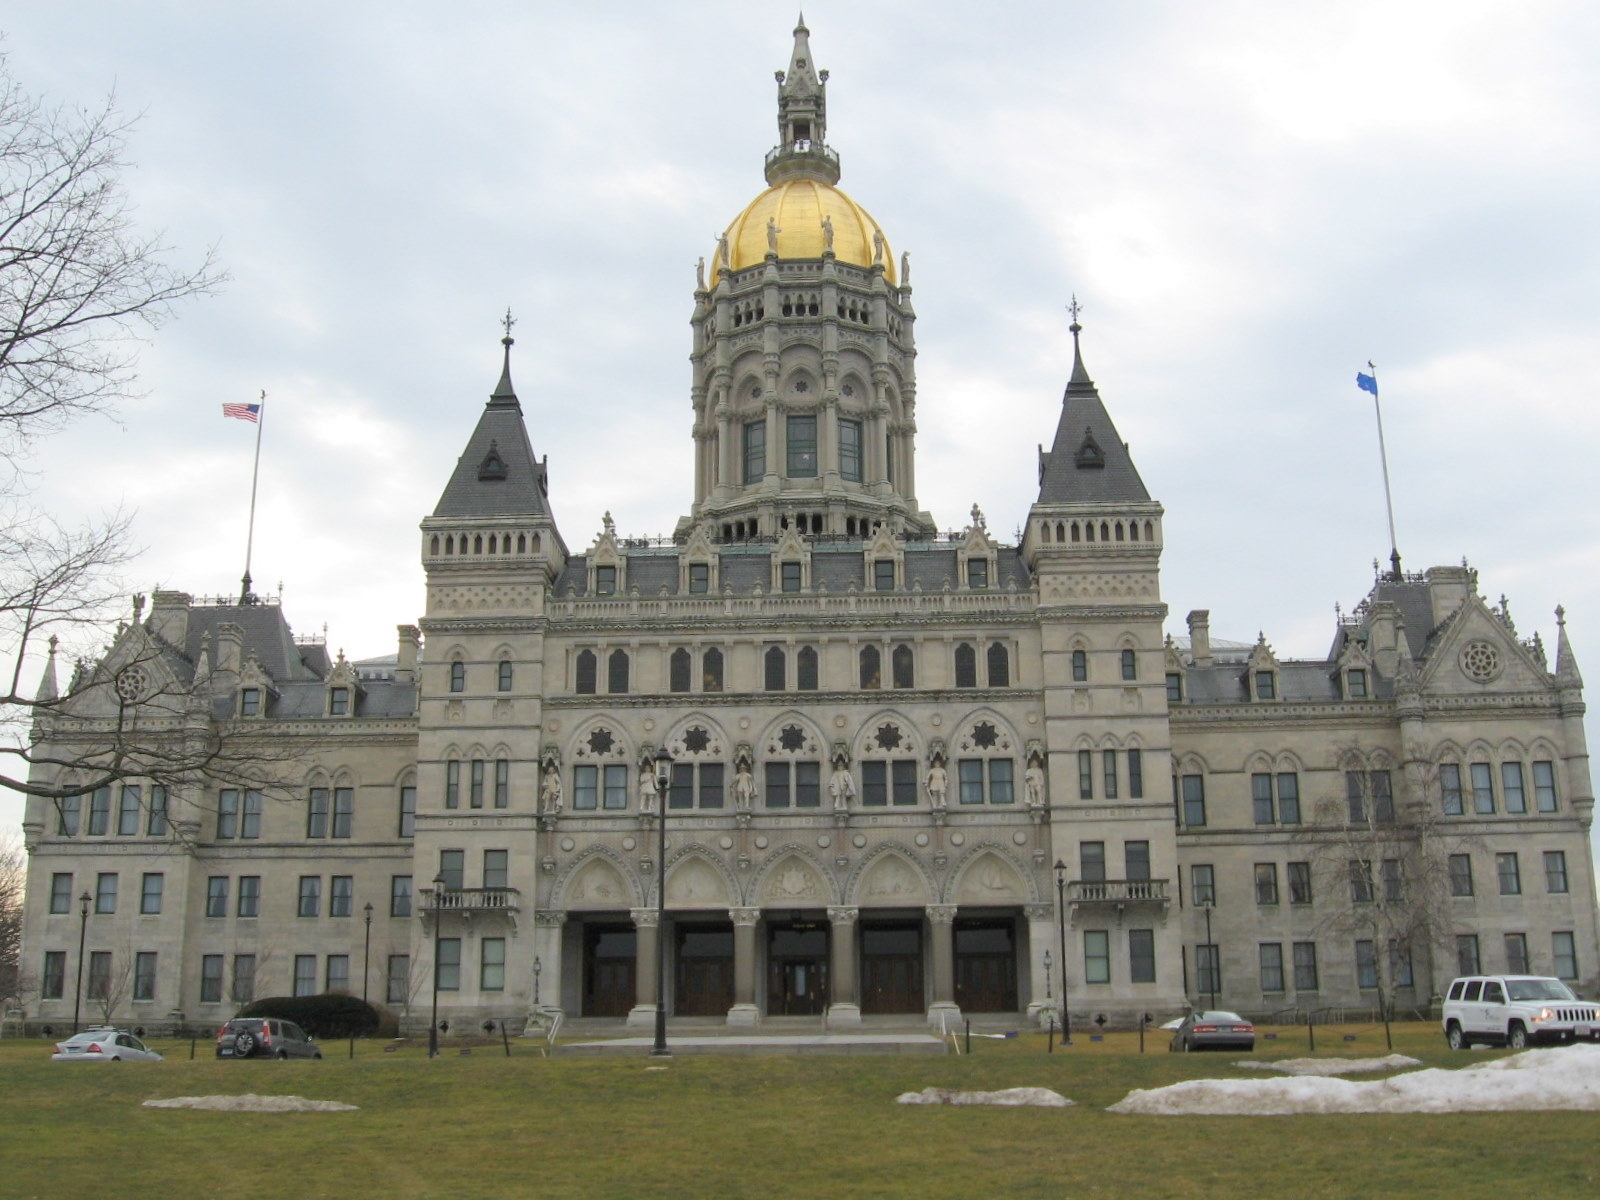 The North Side of the Connecticut State Capitol Building